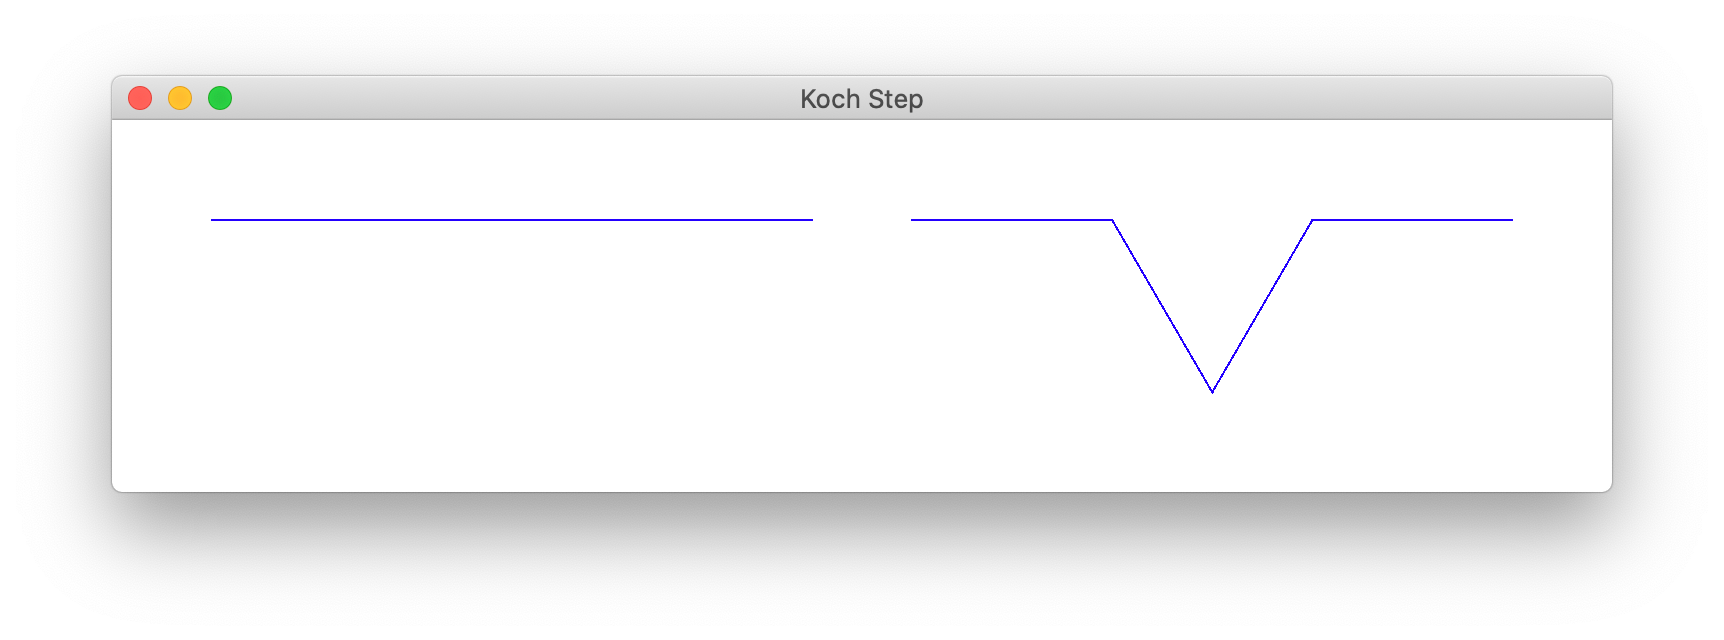 A line segment is transformed by subdividing it and adding a “point” on the right. The new figure consists of 4 line segments, each 1/3 the length of the original segment.